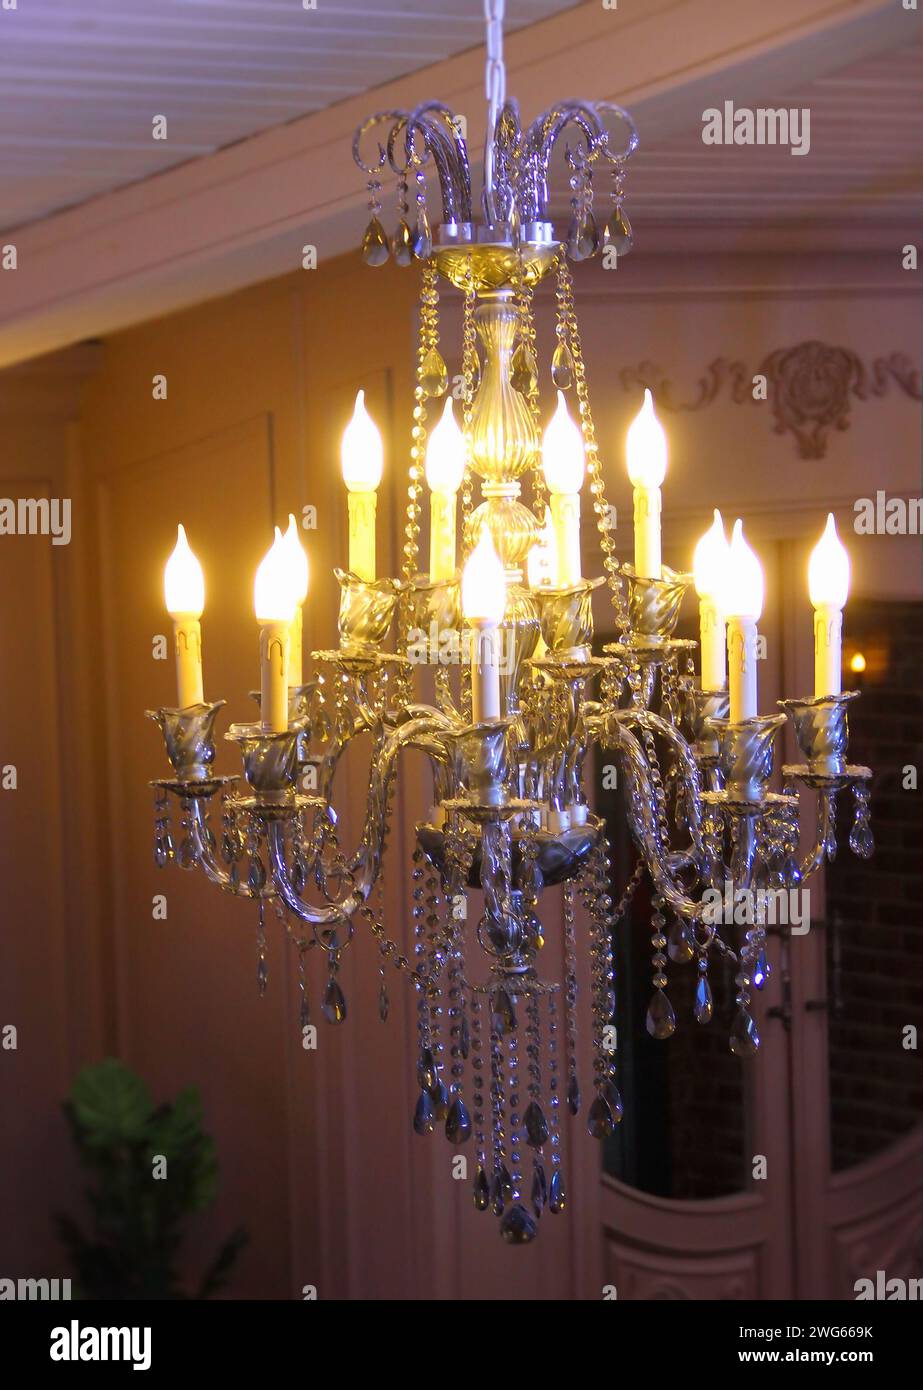 Hanging ceiling chandelier with gold and crystal decoration in classic vintage interior Stock Photo